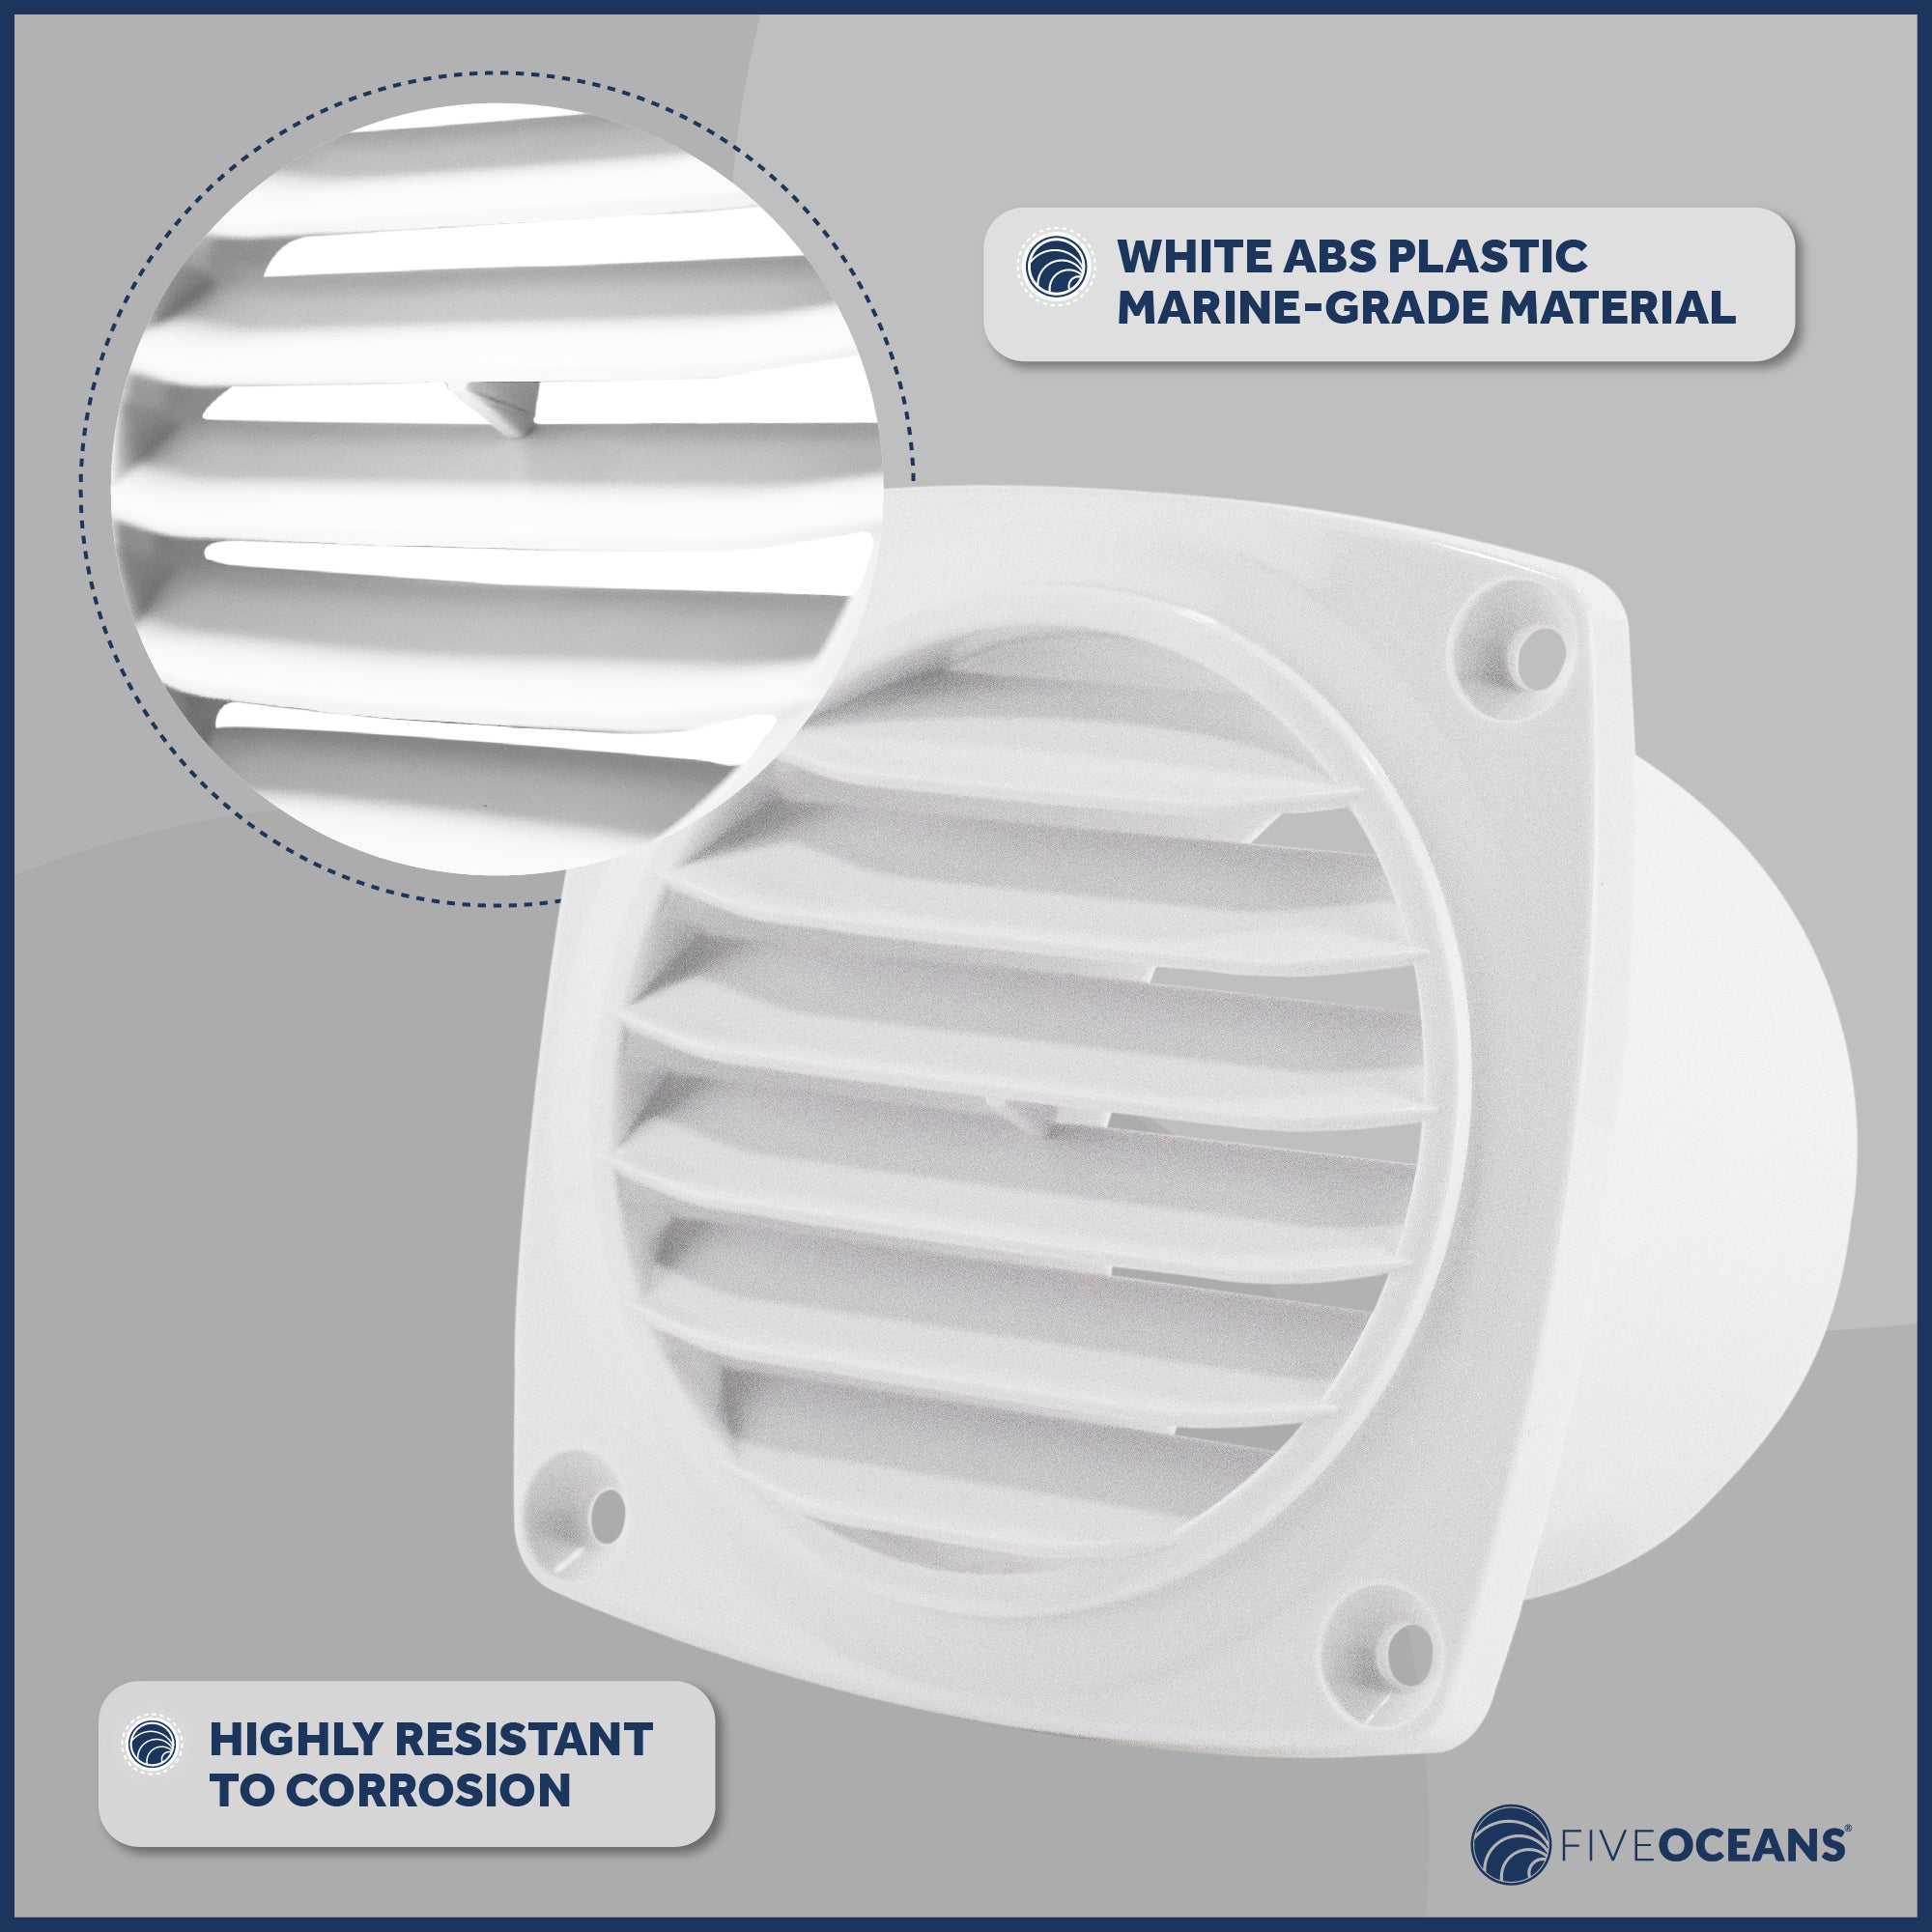 6-Slotted Louvered Hose Vent, 3-inch Hose Diameter, White - FO109